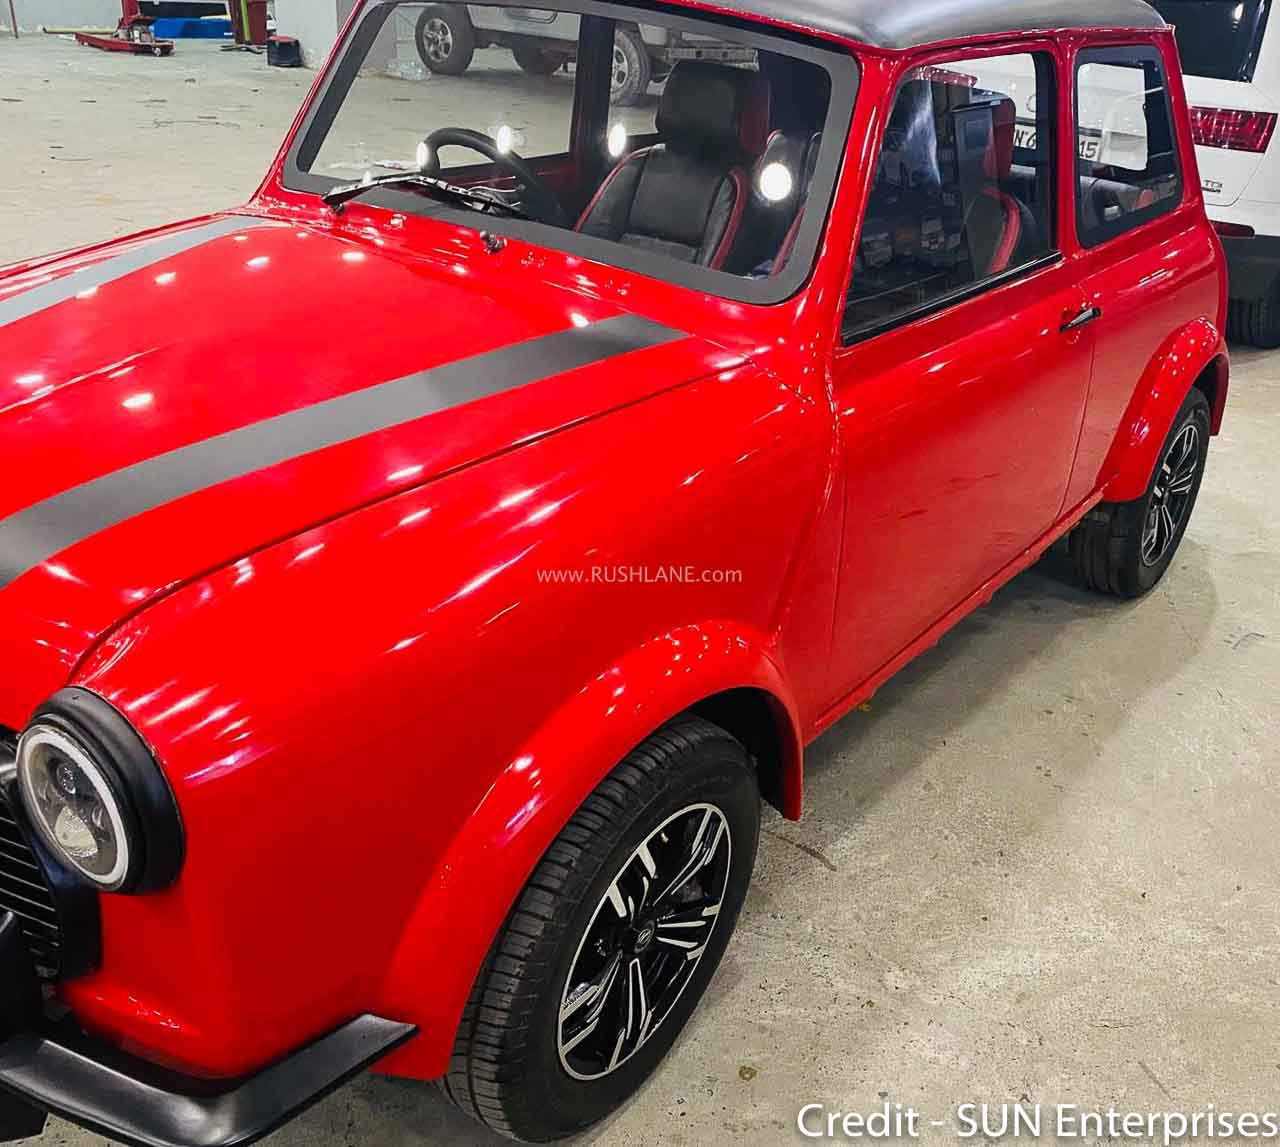 Fiat Premier Padmini Modified By Owner For Rs 8 Lakhs Here Is The Result